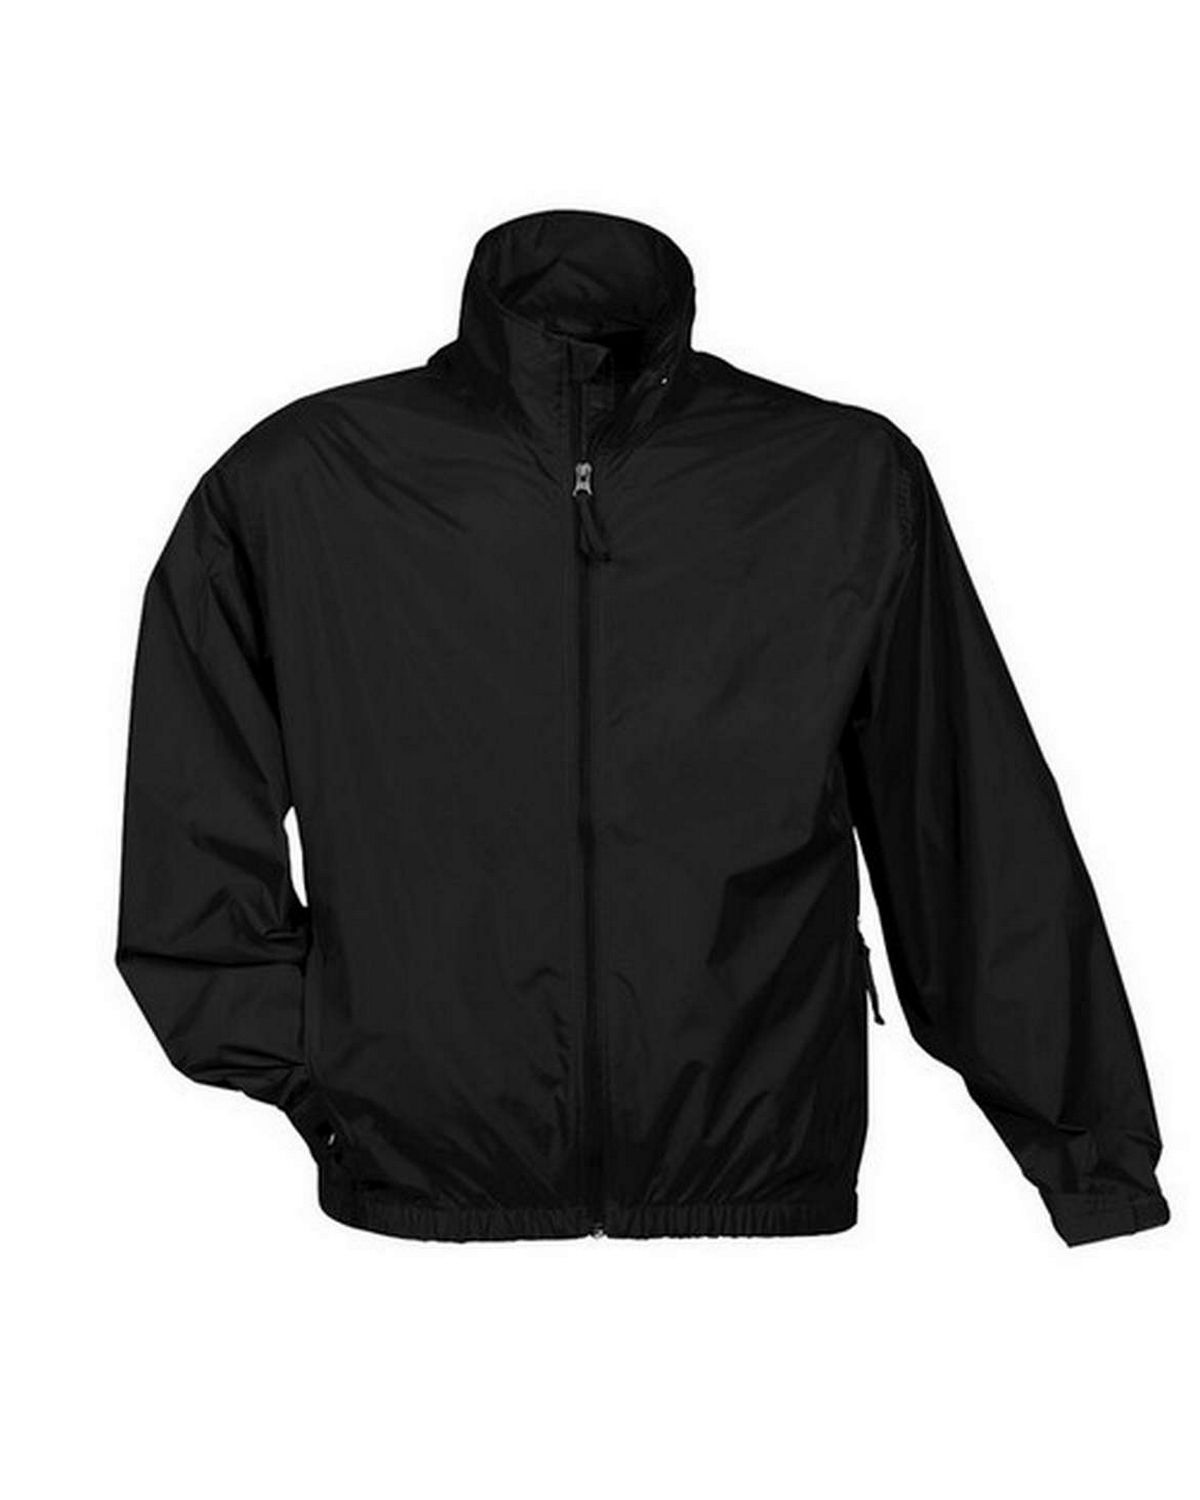 Tri-Mountain 1700 Unlined nylon jacket - Shop at ApparelnBags.com